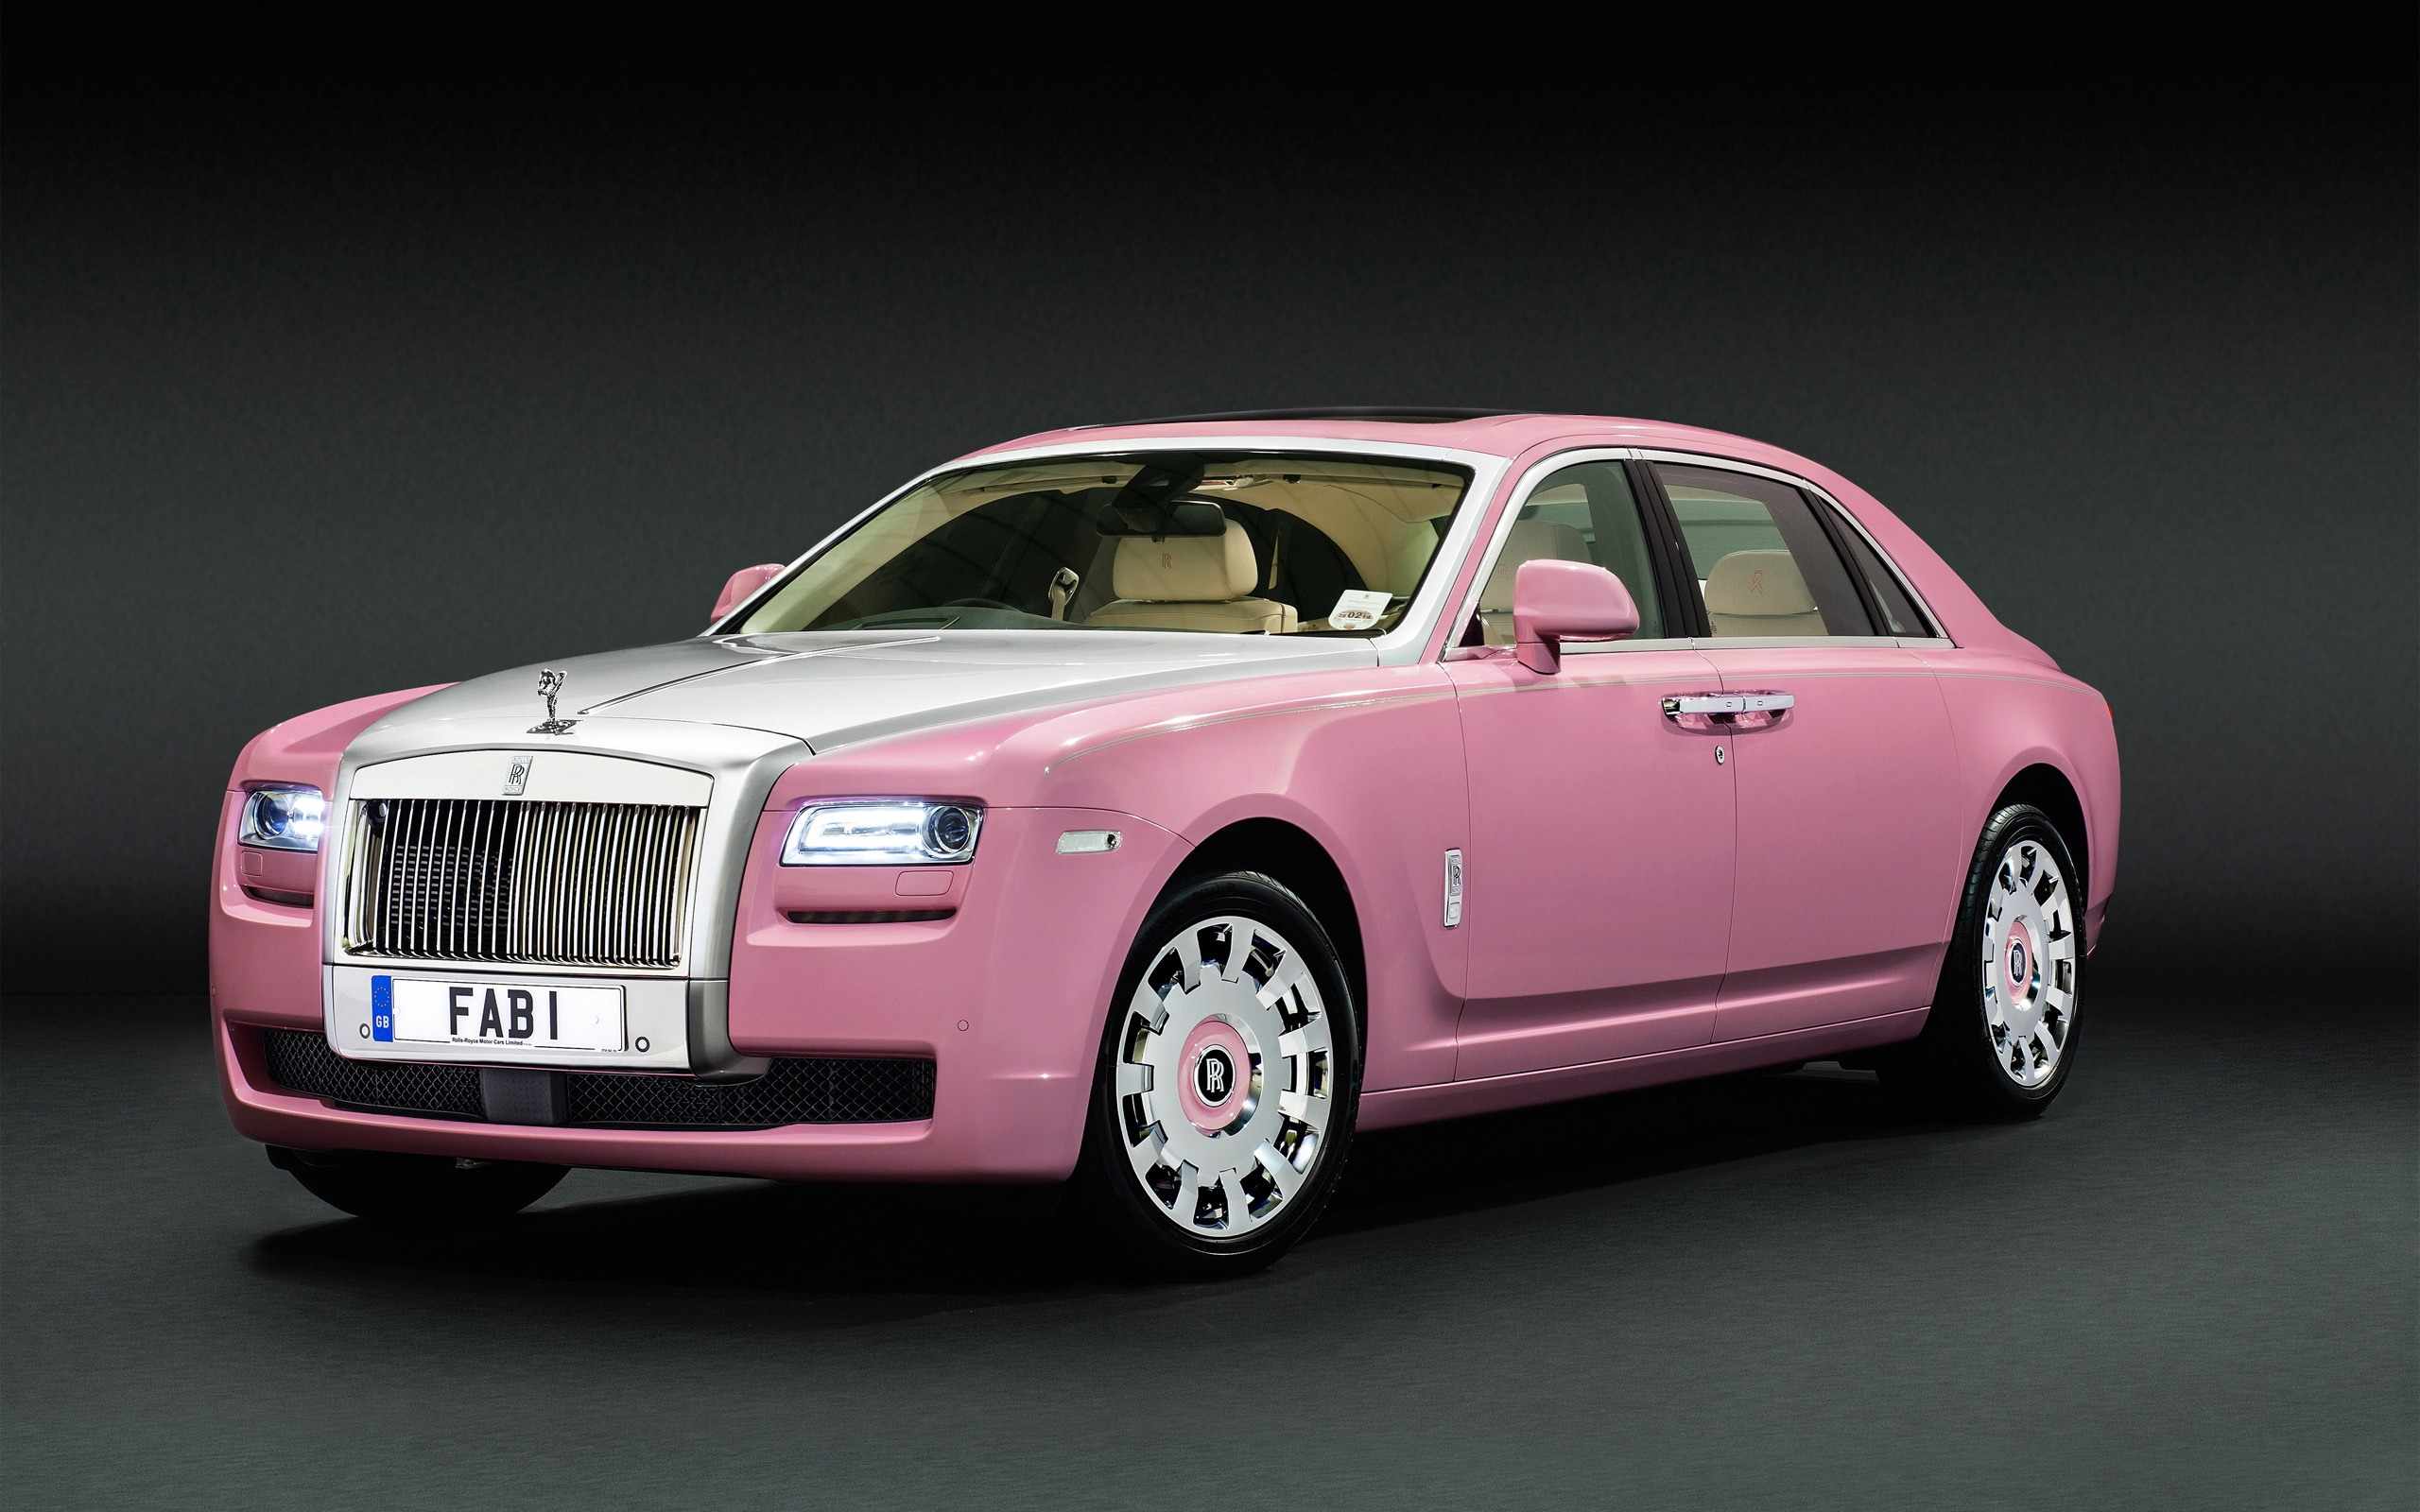 2560x1600 10+ Pink Car HD Wallpapers and Backgrounds